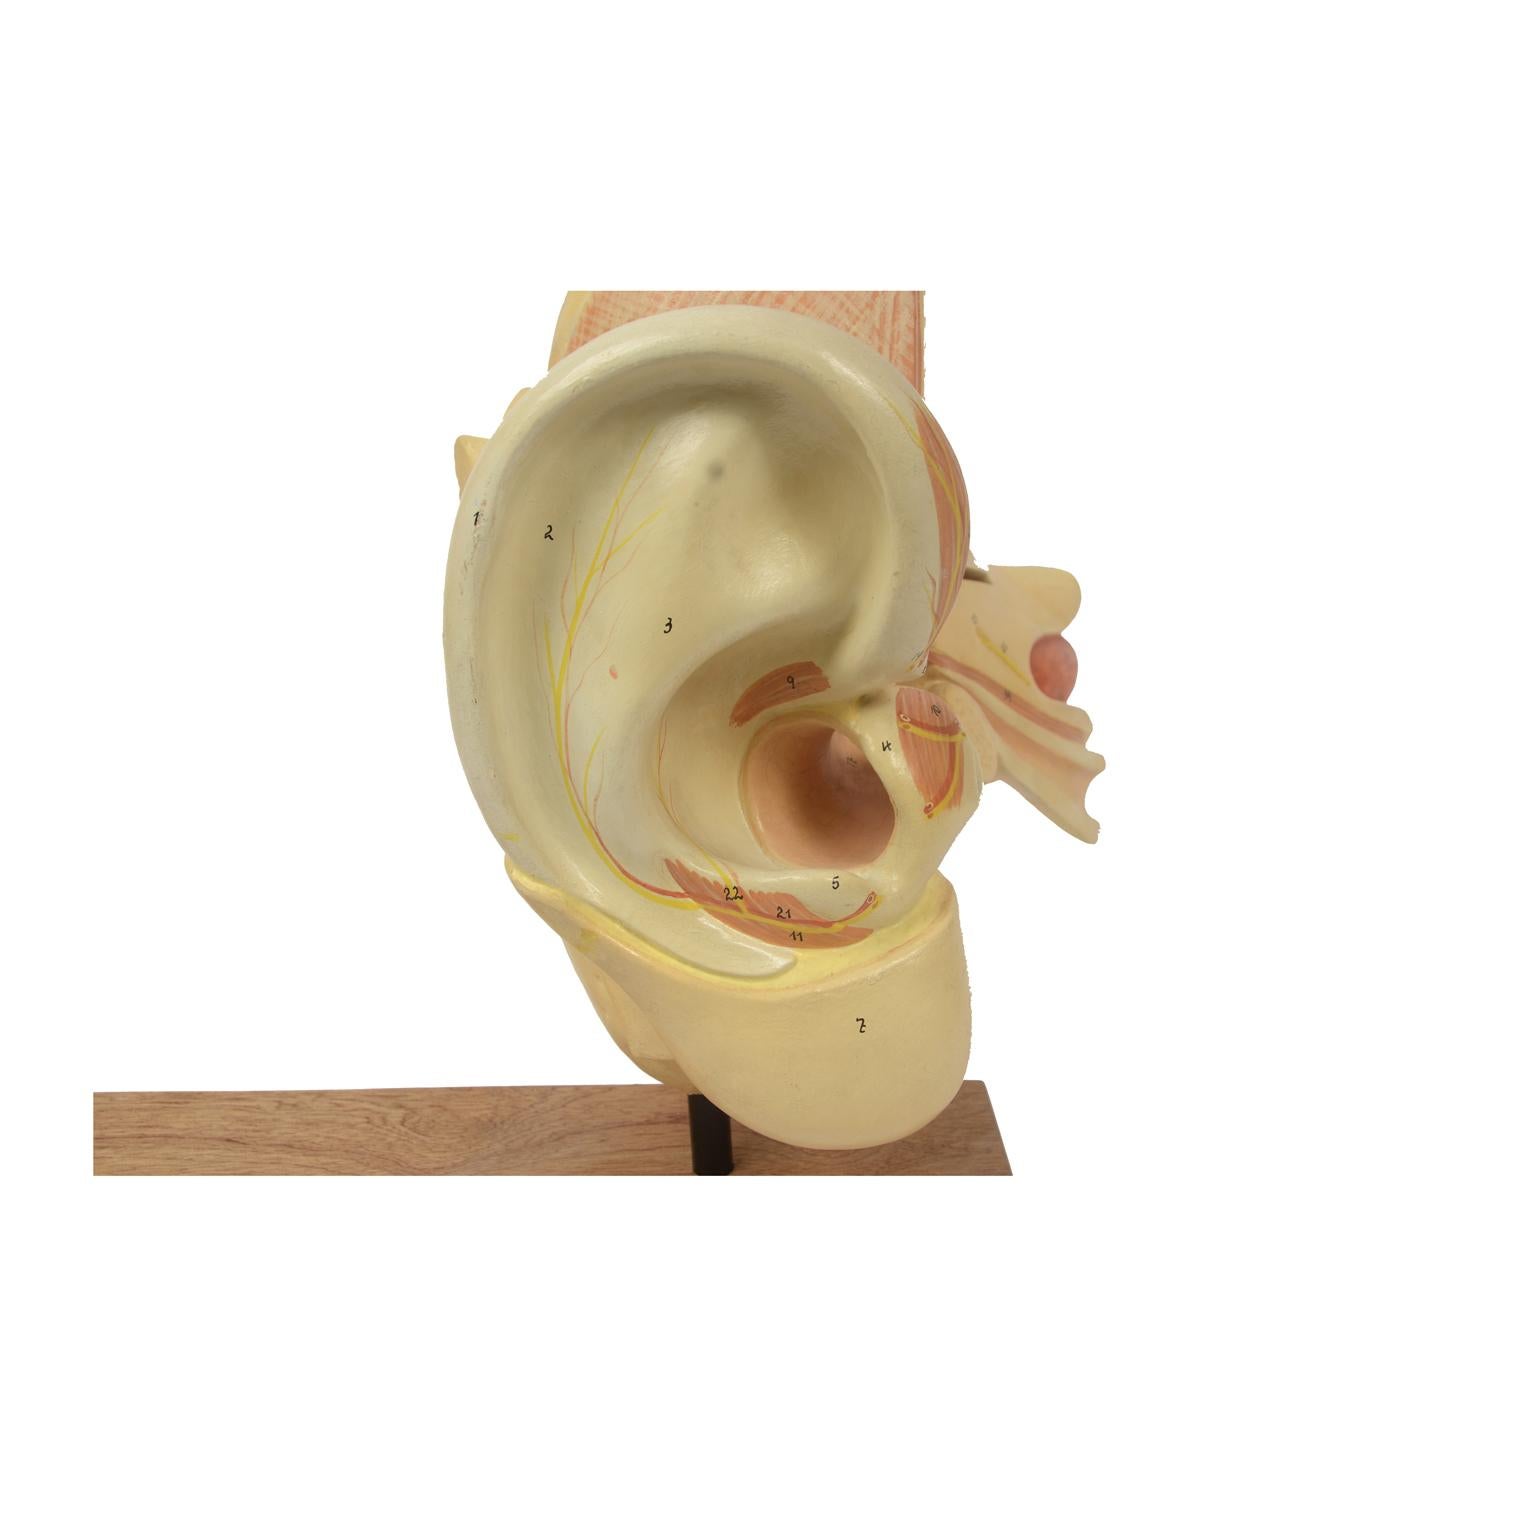 Plaster Late 19th Century Educational Human Anatomical Ear  Model German manufacture  For Sale